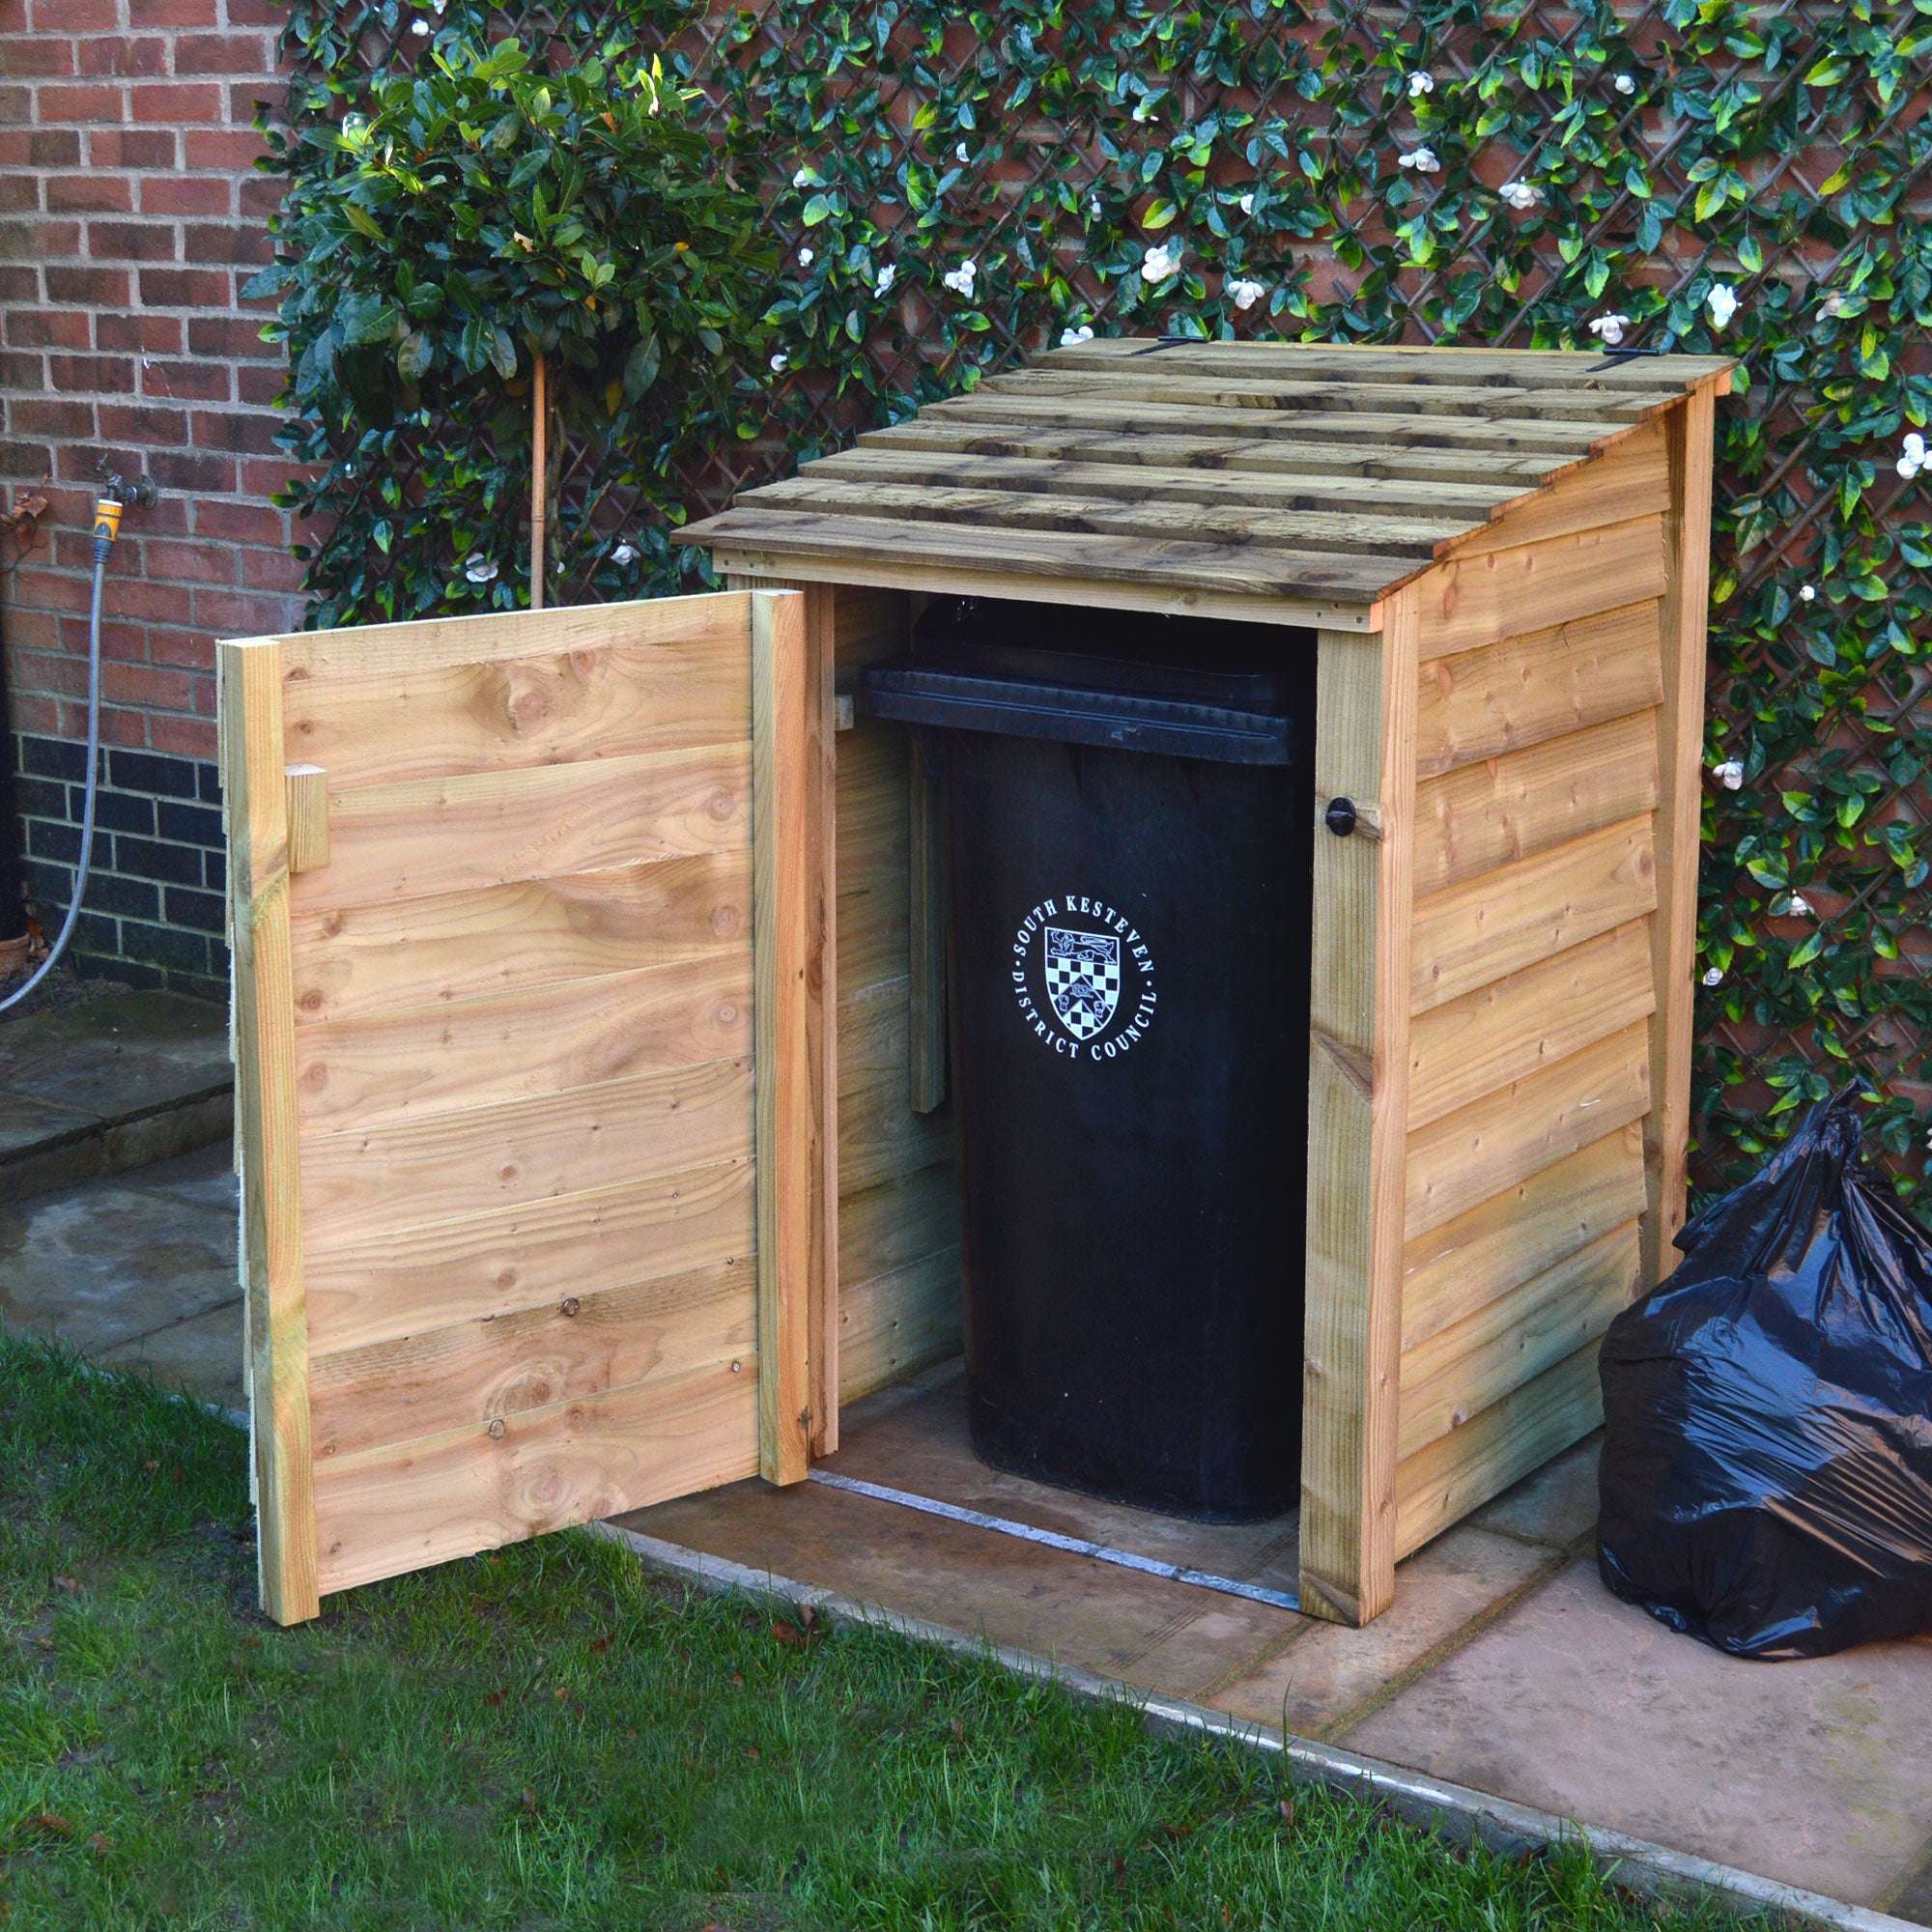 Exceptional Garden:Rutland Country Morcott Single Recycling Storage Unit